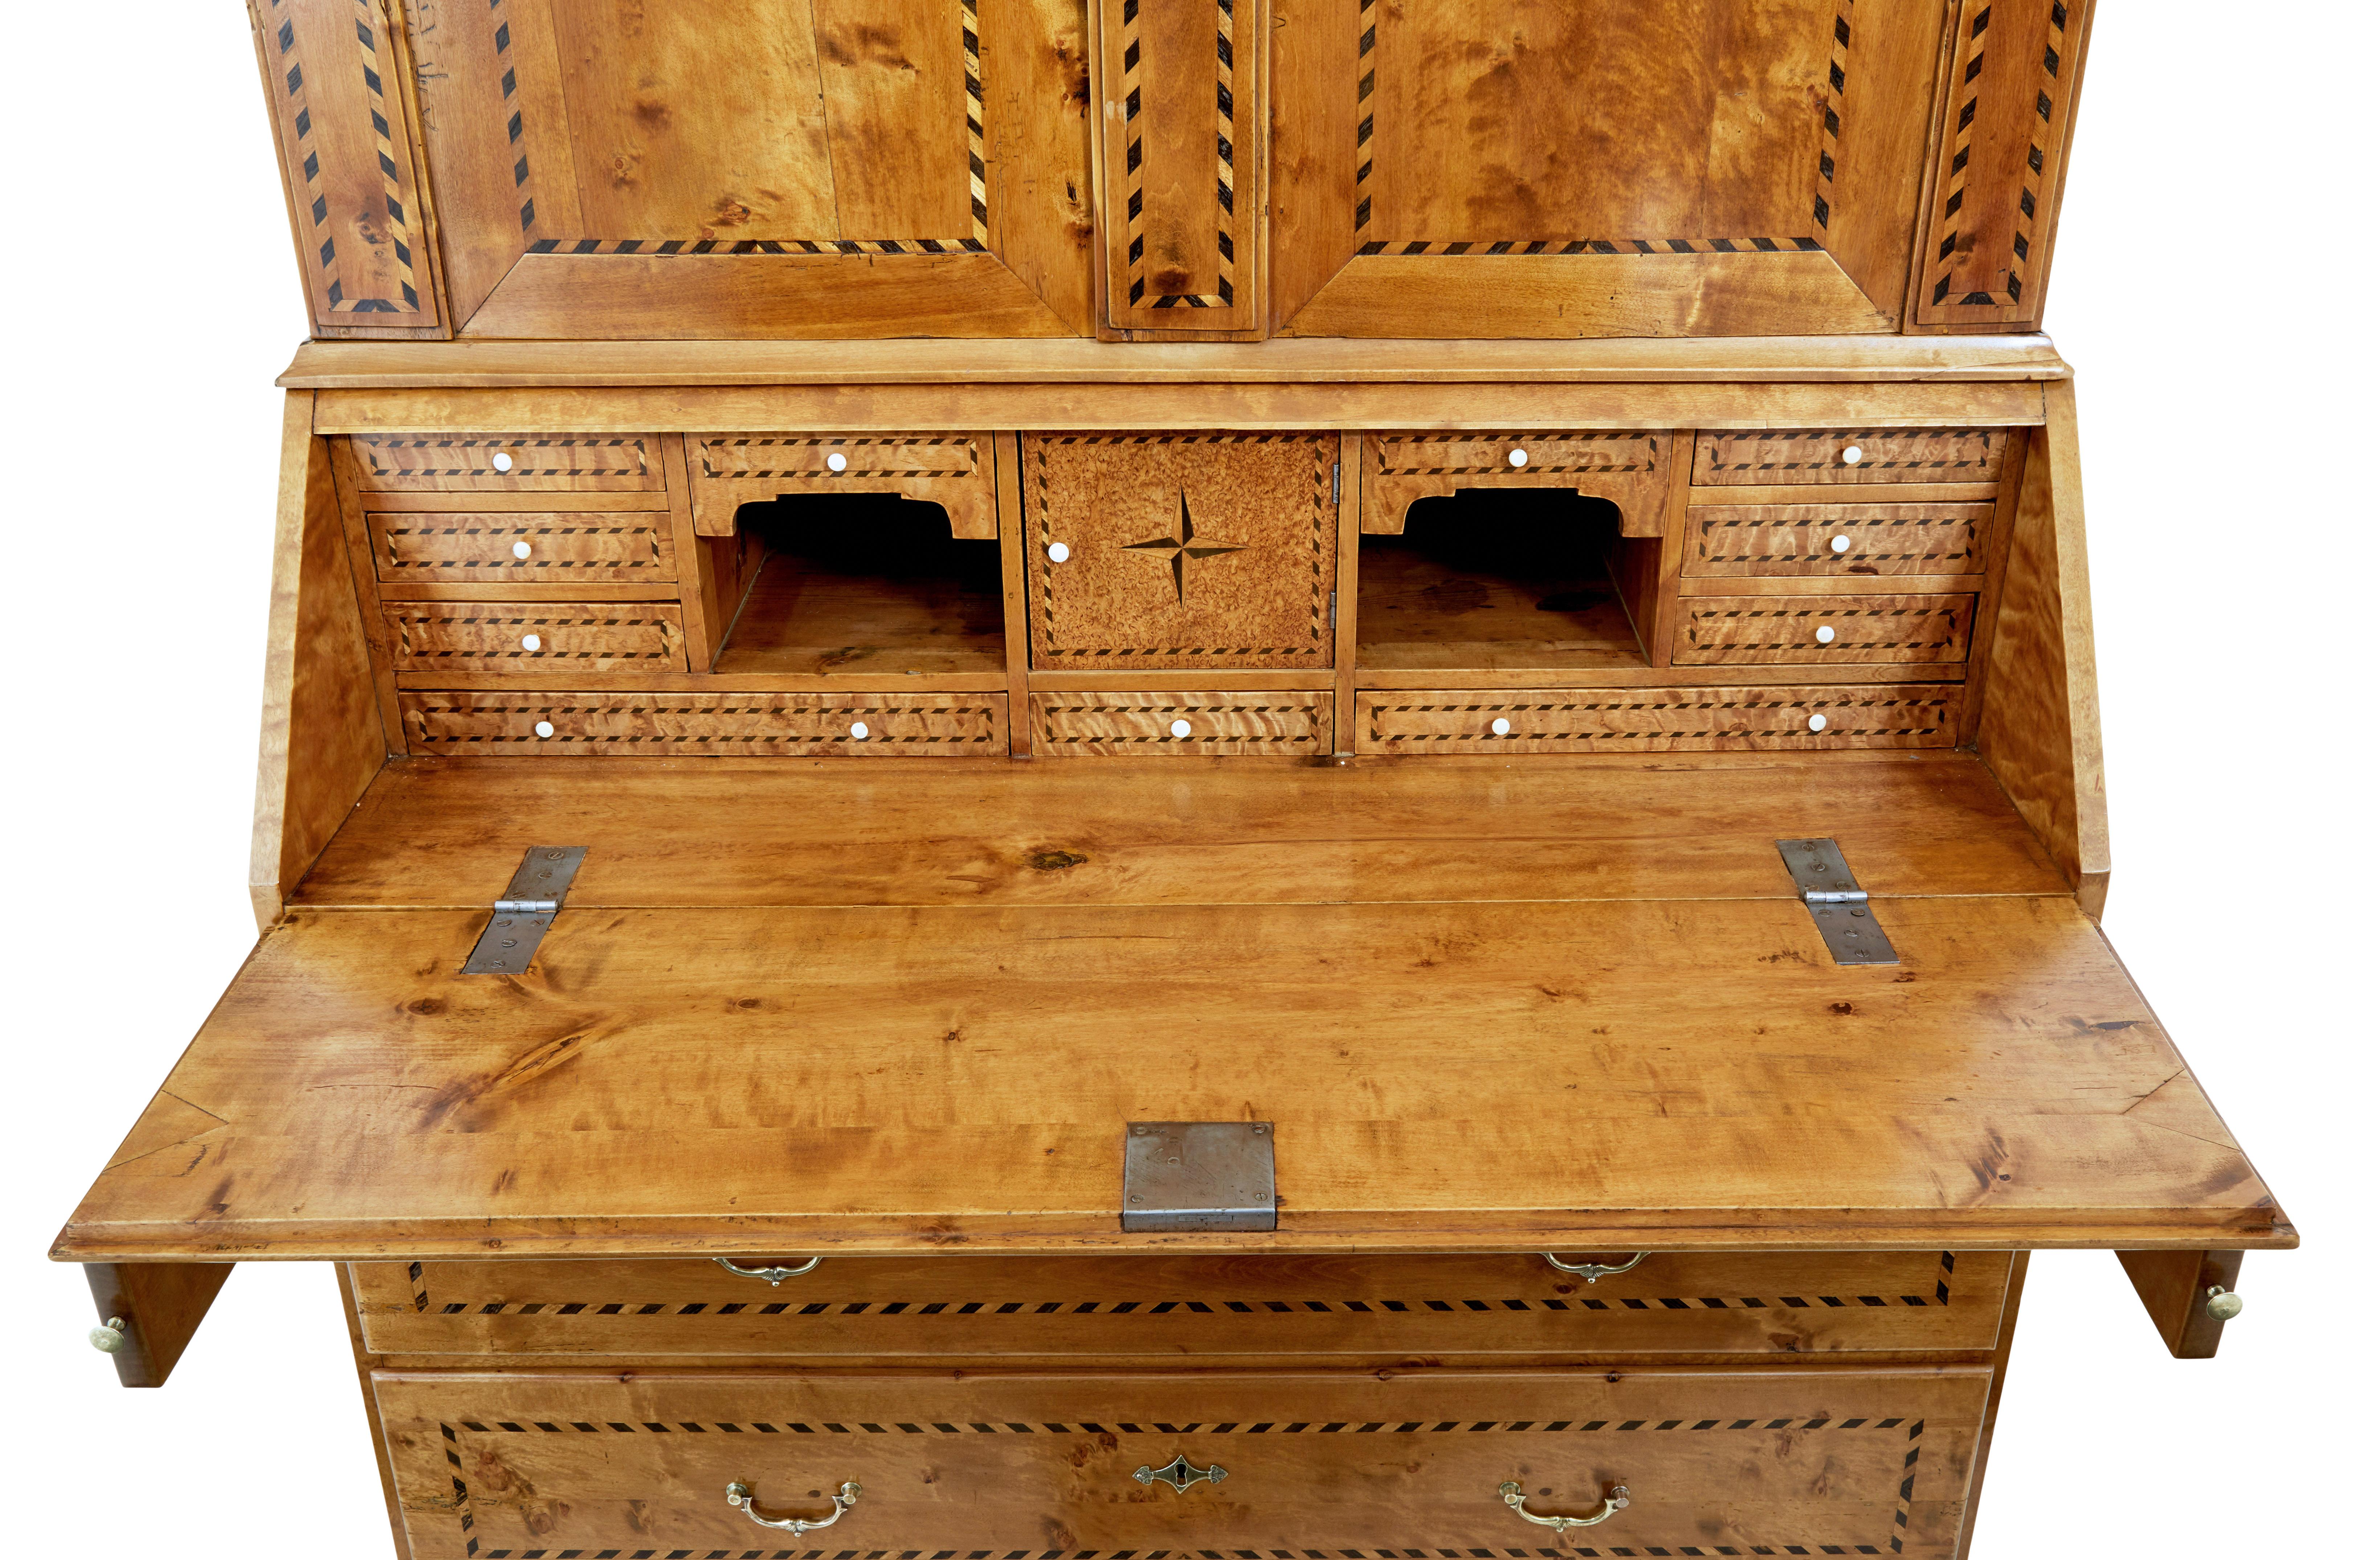 Swedish 1870s Birch Inlaid Secretary with Inlaid Motifs and Slant Front Desk In Good Condition For Sale In Atlanta, GA